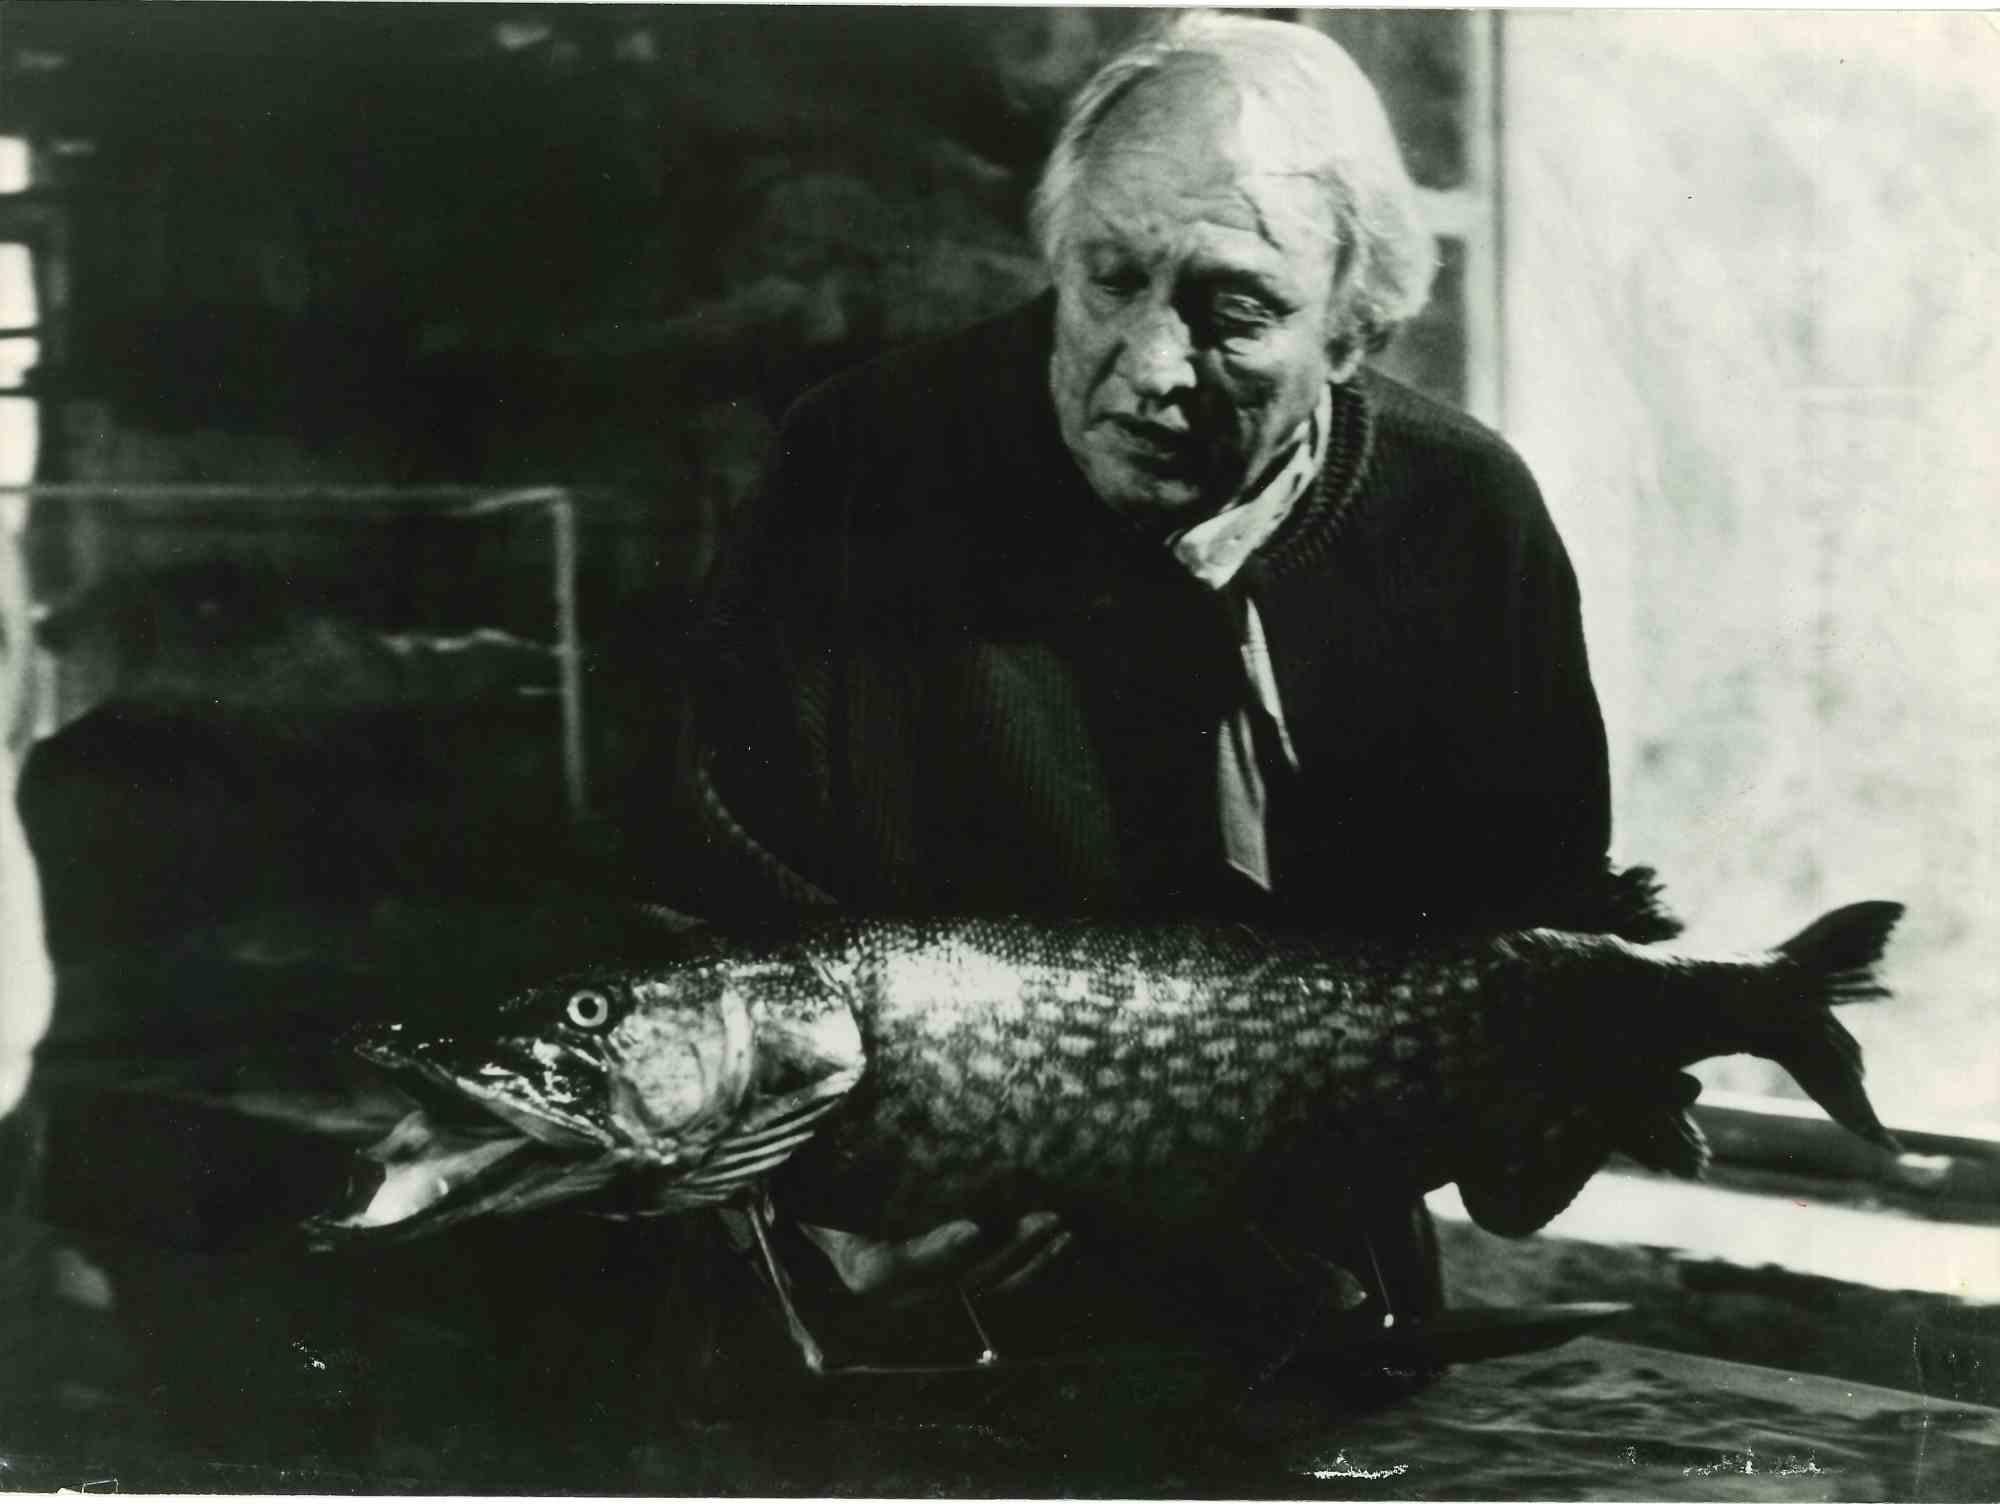 Unknown Figurative Photograph - The Trout - Photo - 1960s